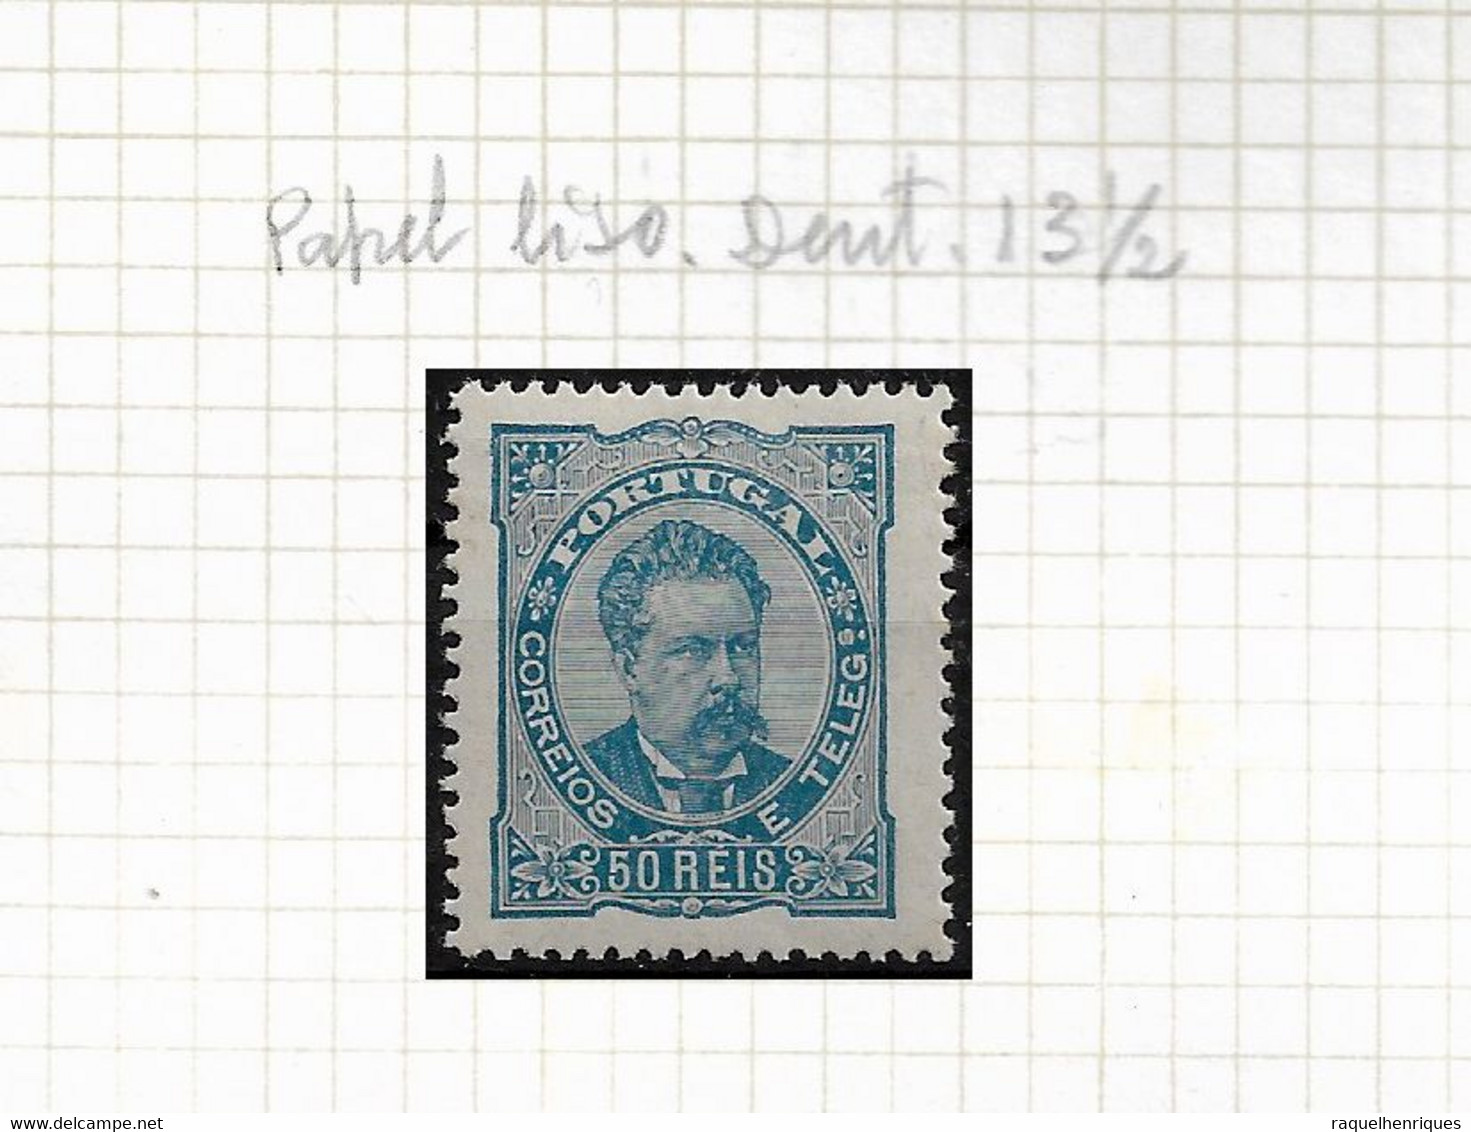 PORTUGAL STAMP - 1882-83 D.LUIS I P.LISO Perf: 13½ Md#58d MLH (LPT1#186) - Unused Stamps